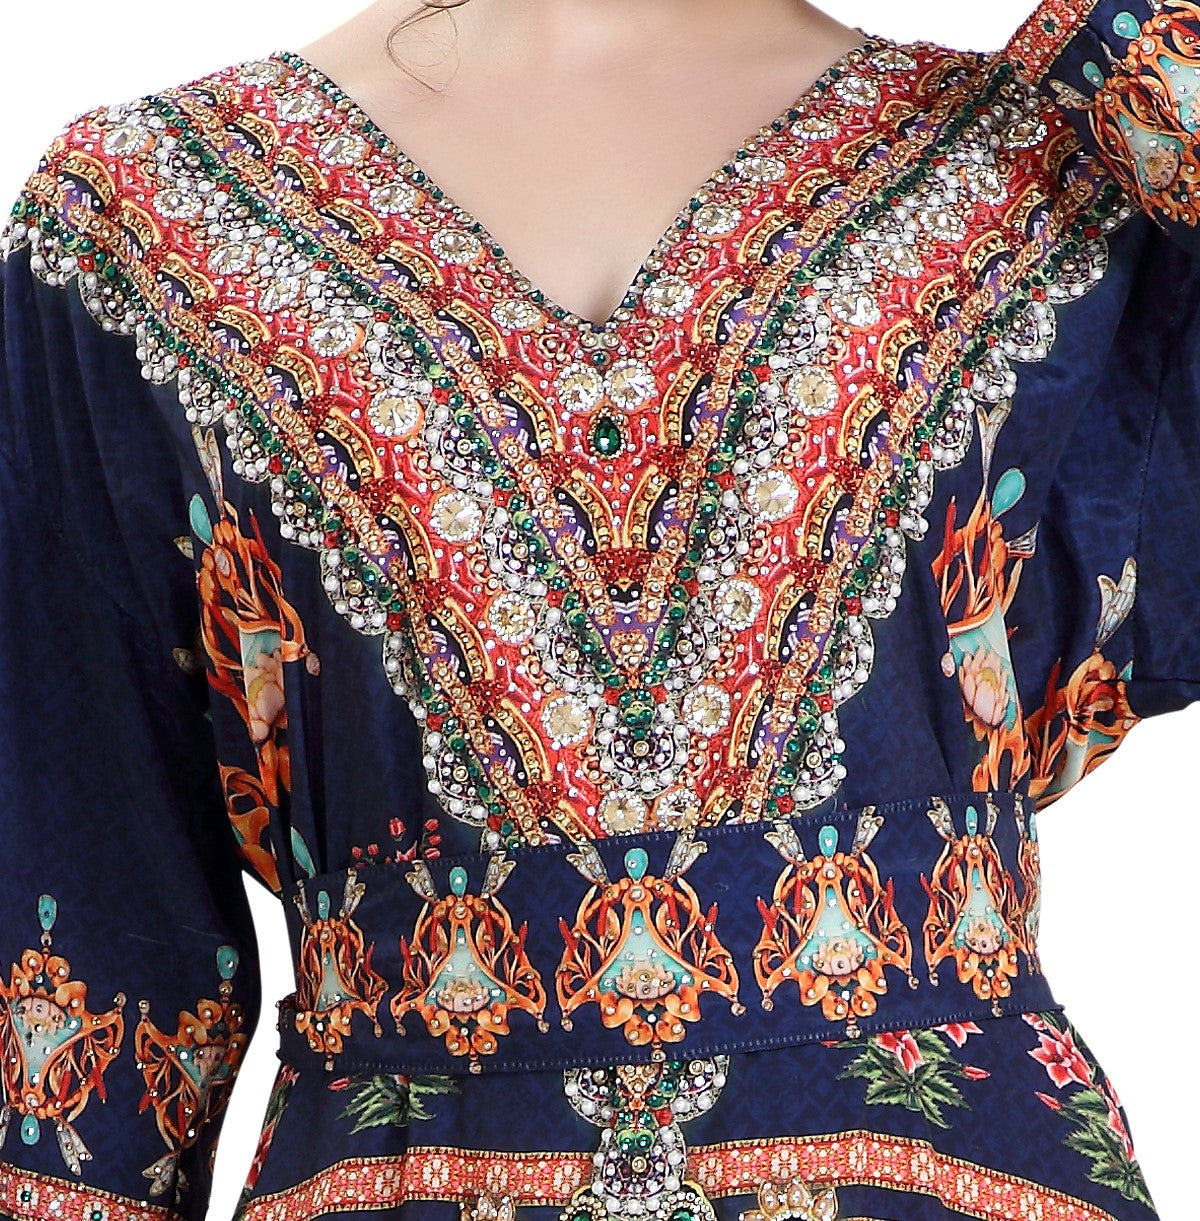 Load image into Gallery viewer, Beach Dress With Crystal Bead Printed Caftan - Maxim Creation
